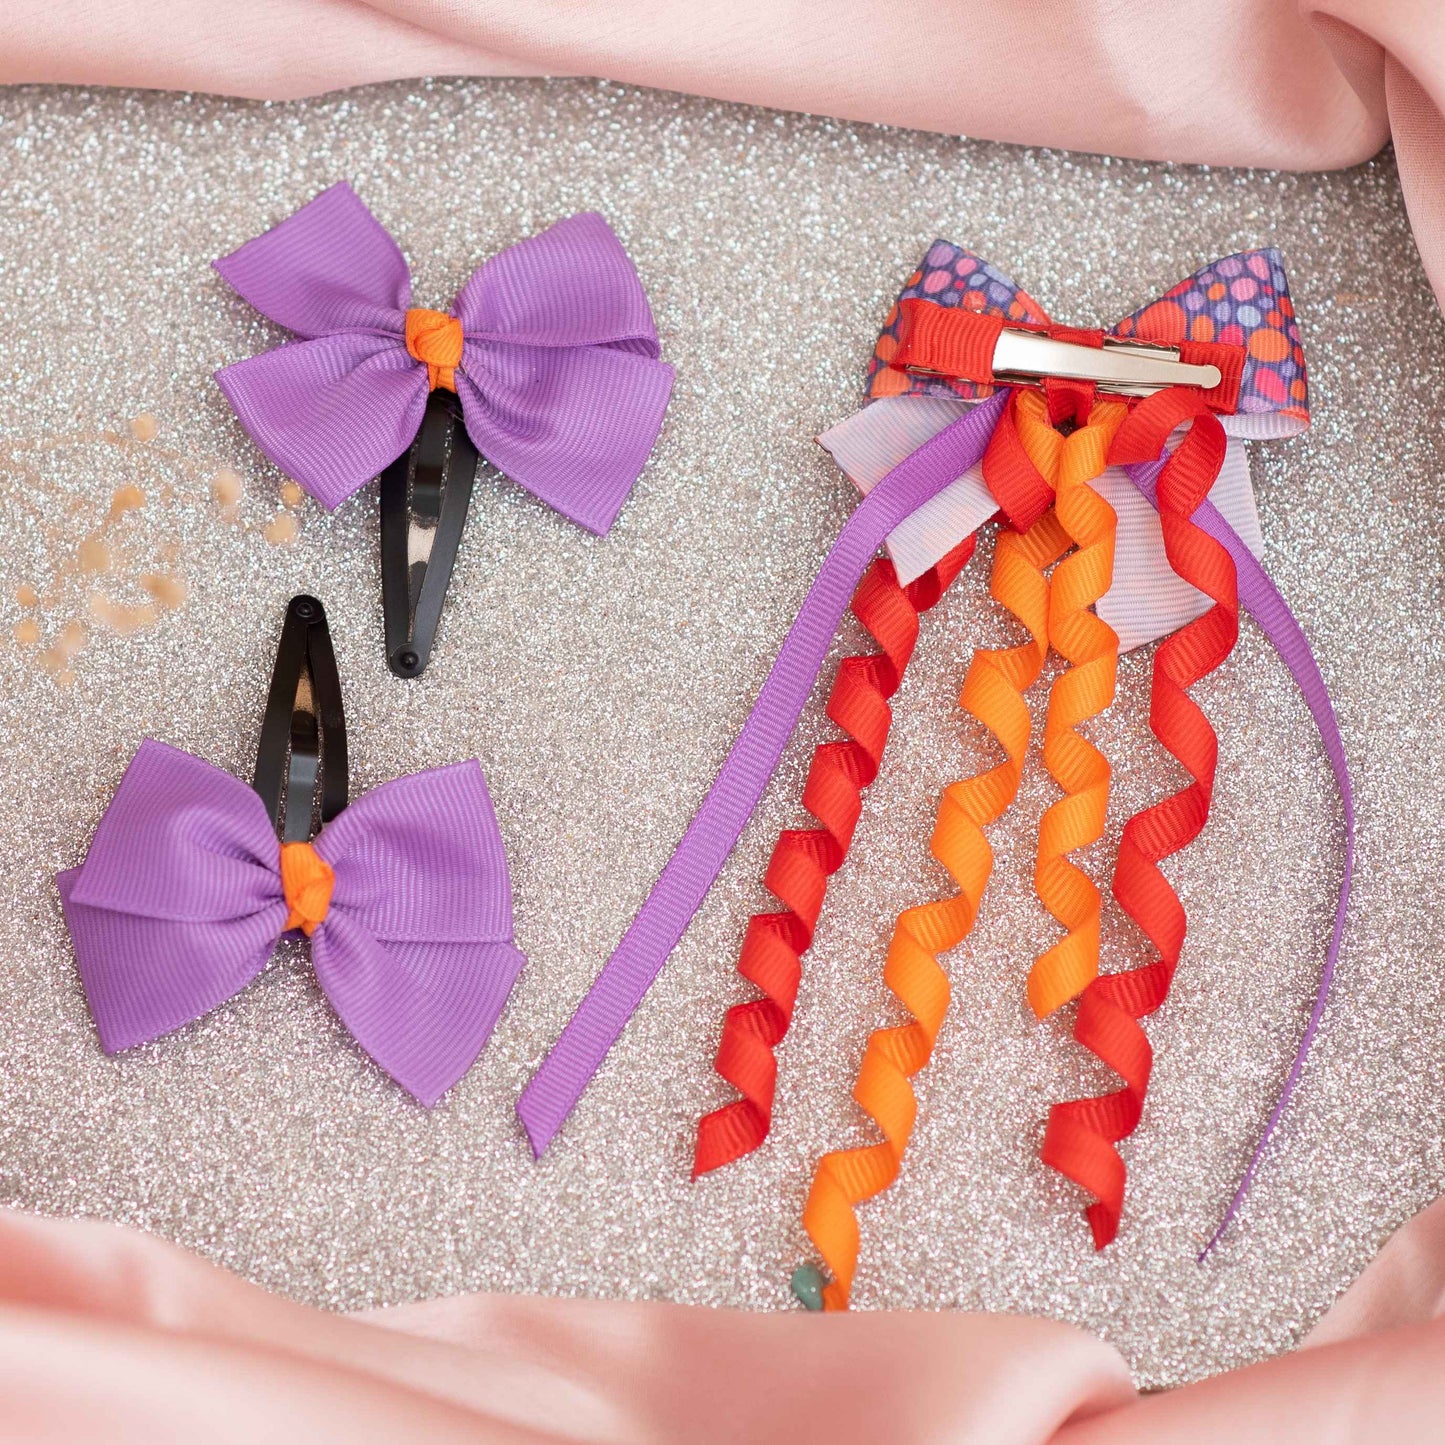 Combo: Cute dangler on alligator clip along with cute and fancy bow on tic-tac pins - Purple, Red, and Orange